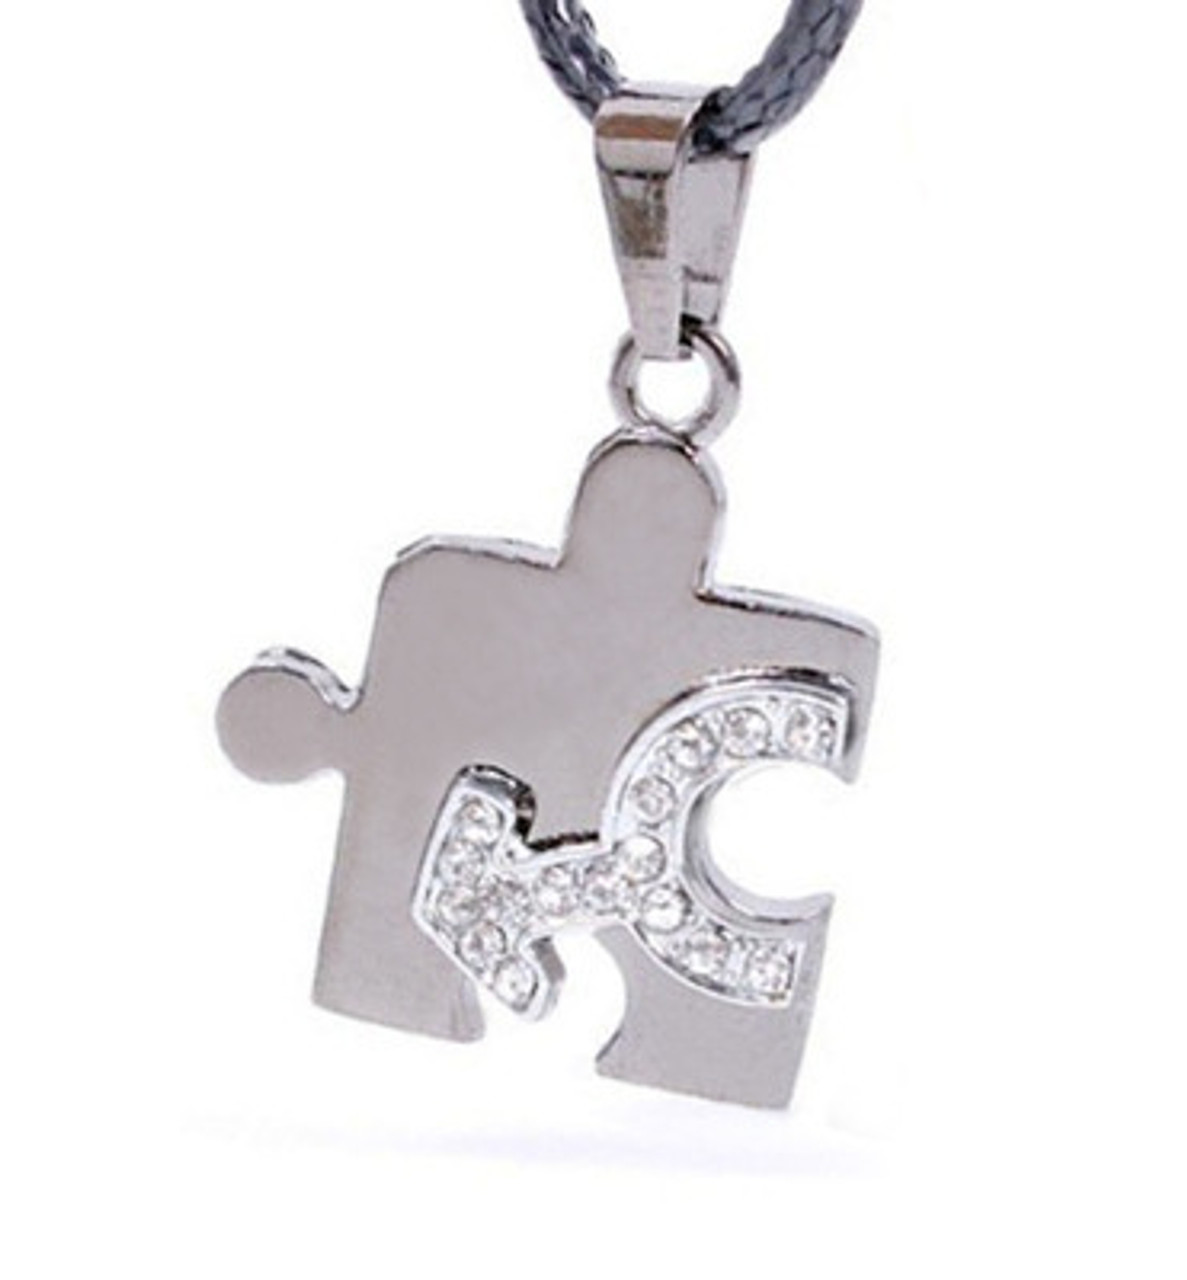 FREE Pendant - Free with $45 or more. Coupon Code: BLINGMALE  - (1) One Male CZ Bling Puzzle Steel & Mars Symbol Men's Gay Pride Pendant - Gay Pride Necklace